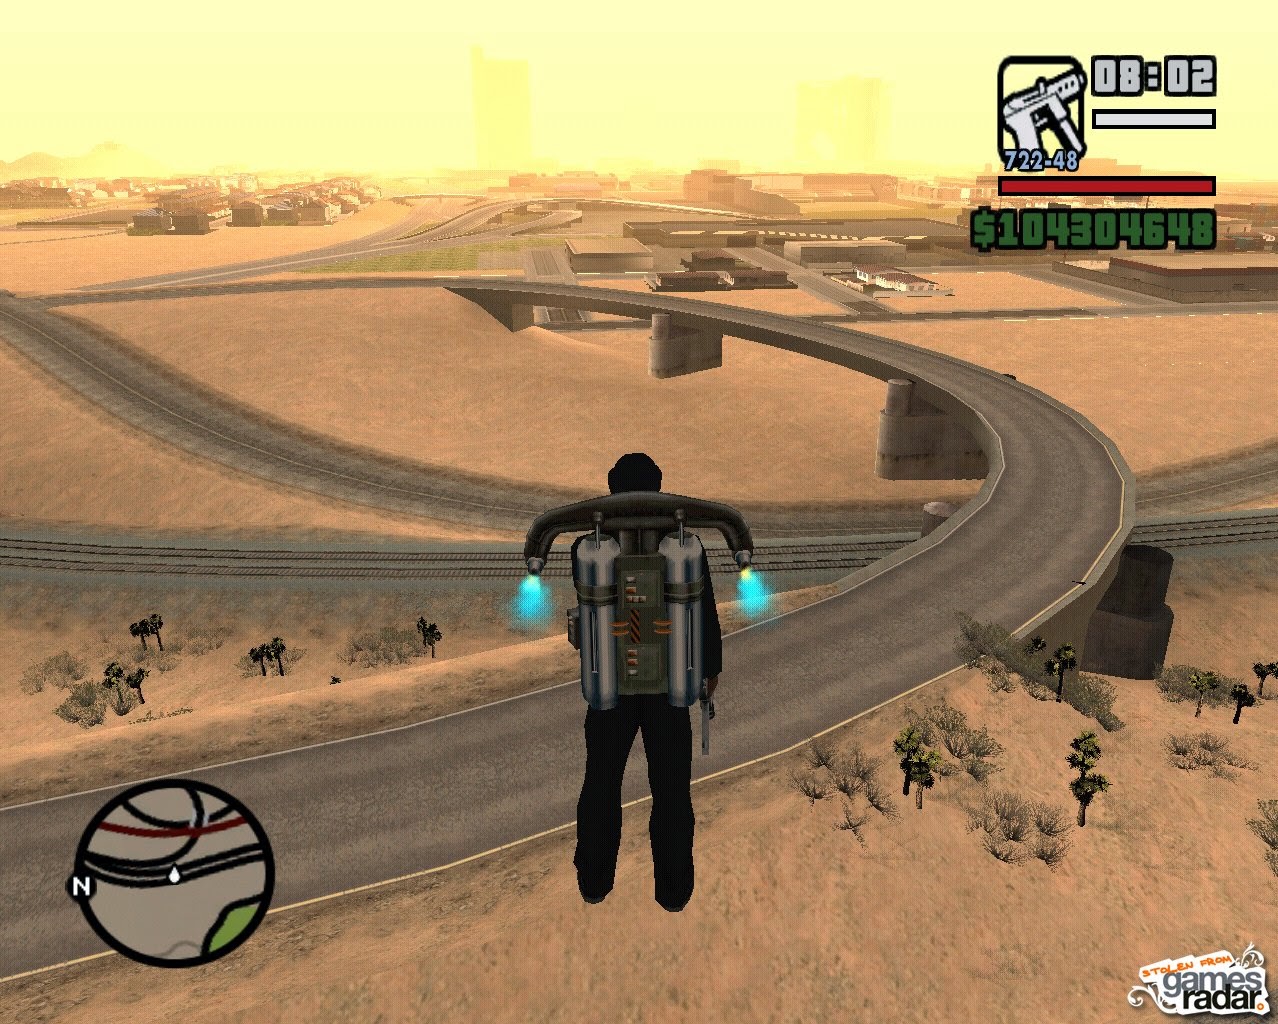 grand theft auto san andreas multiplayer free download